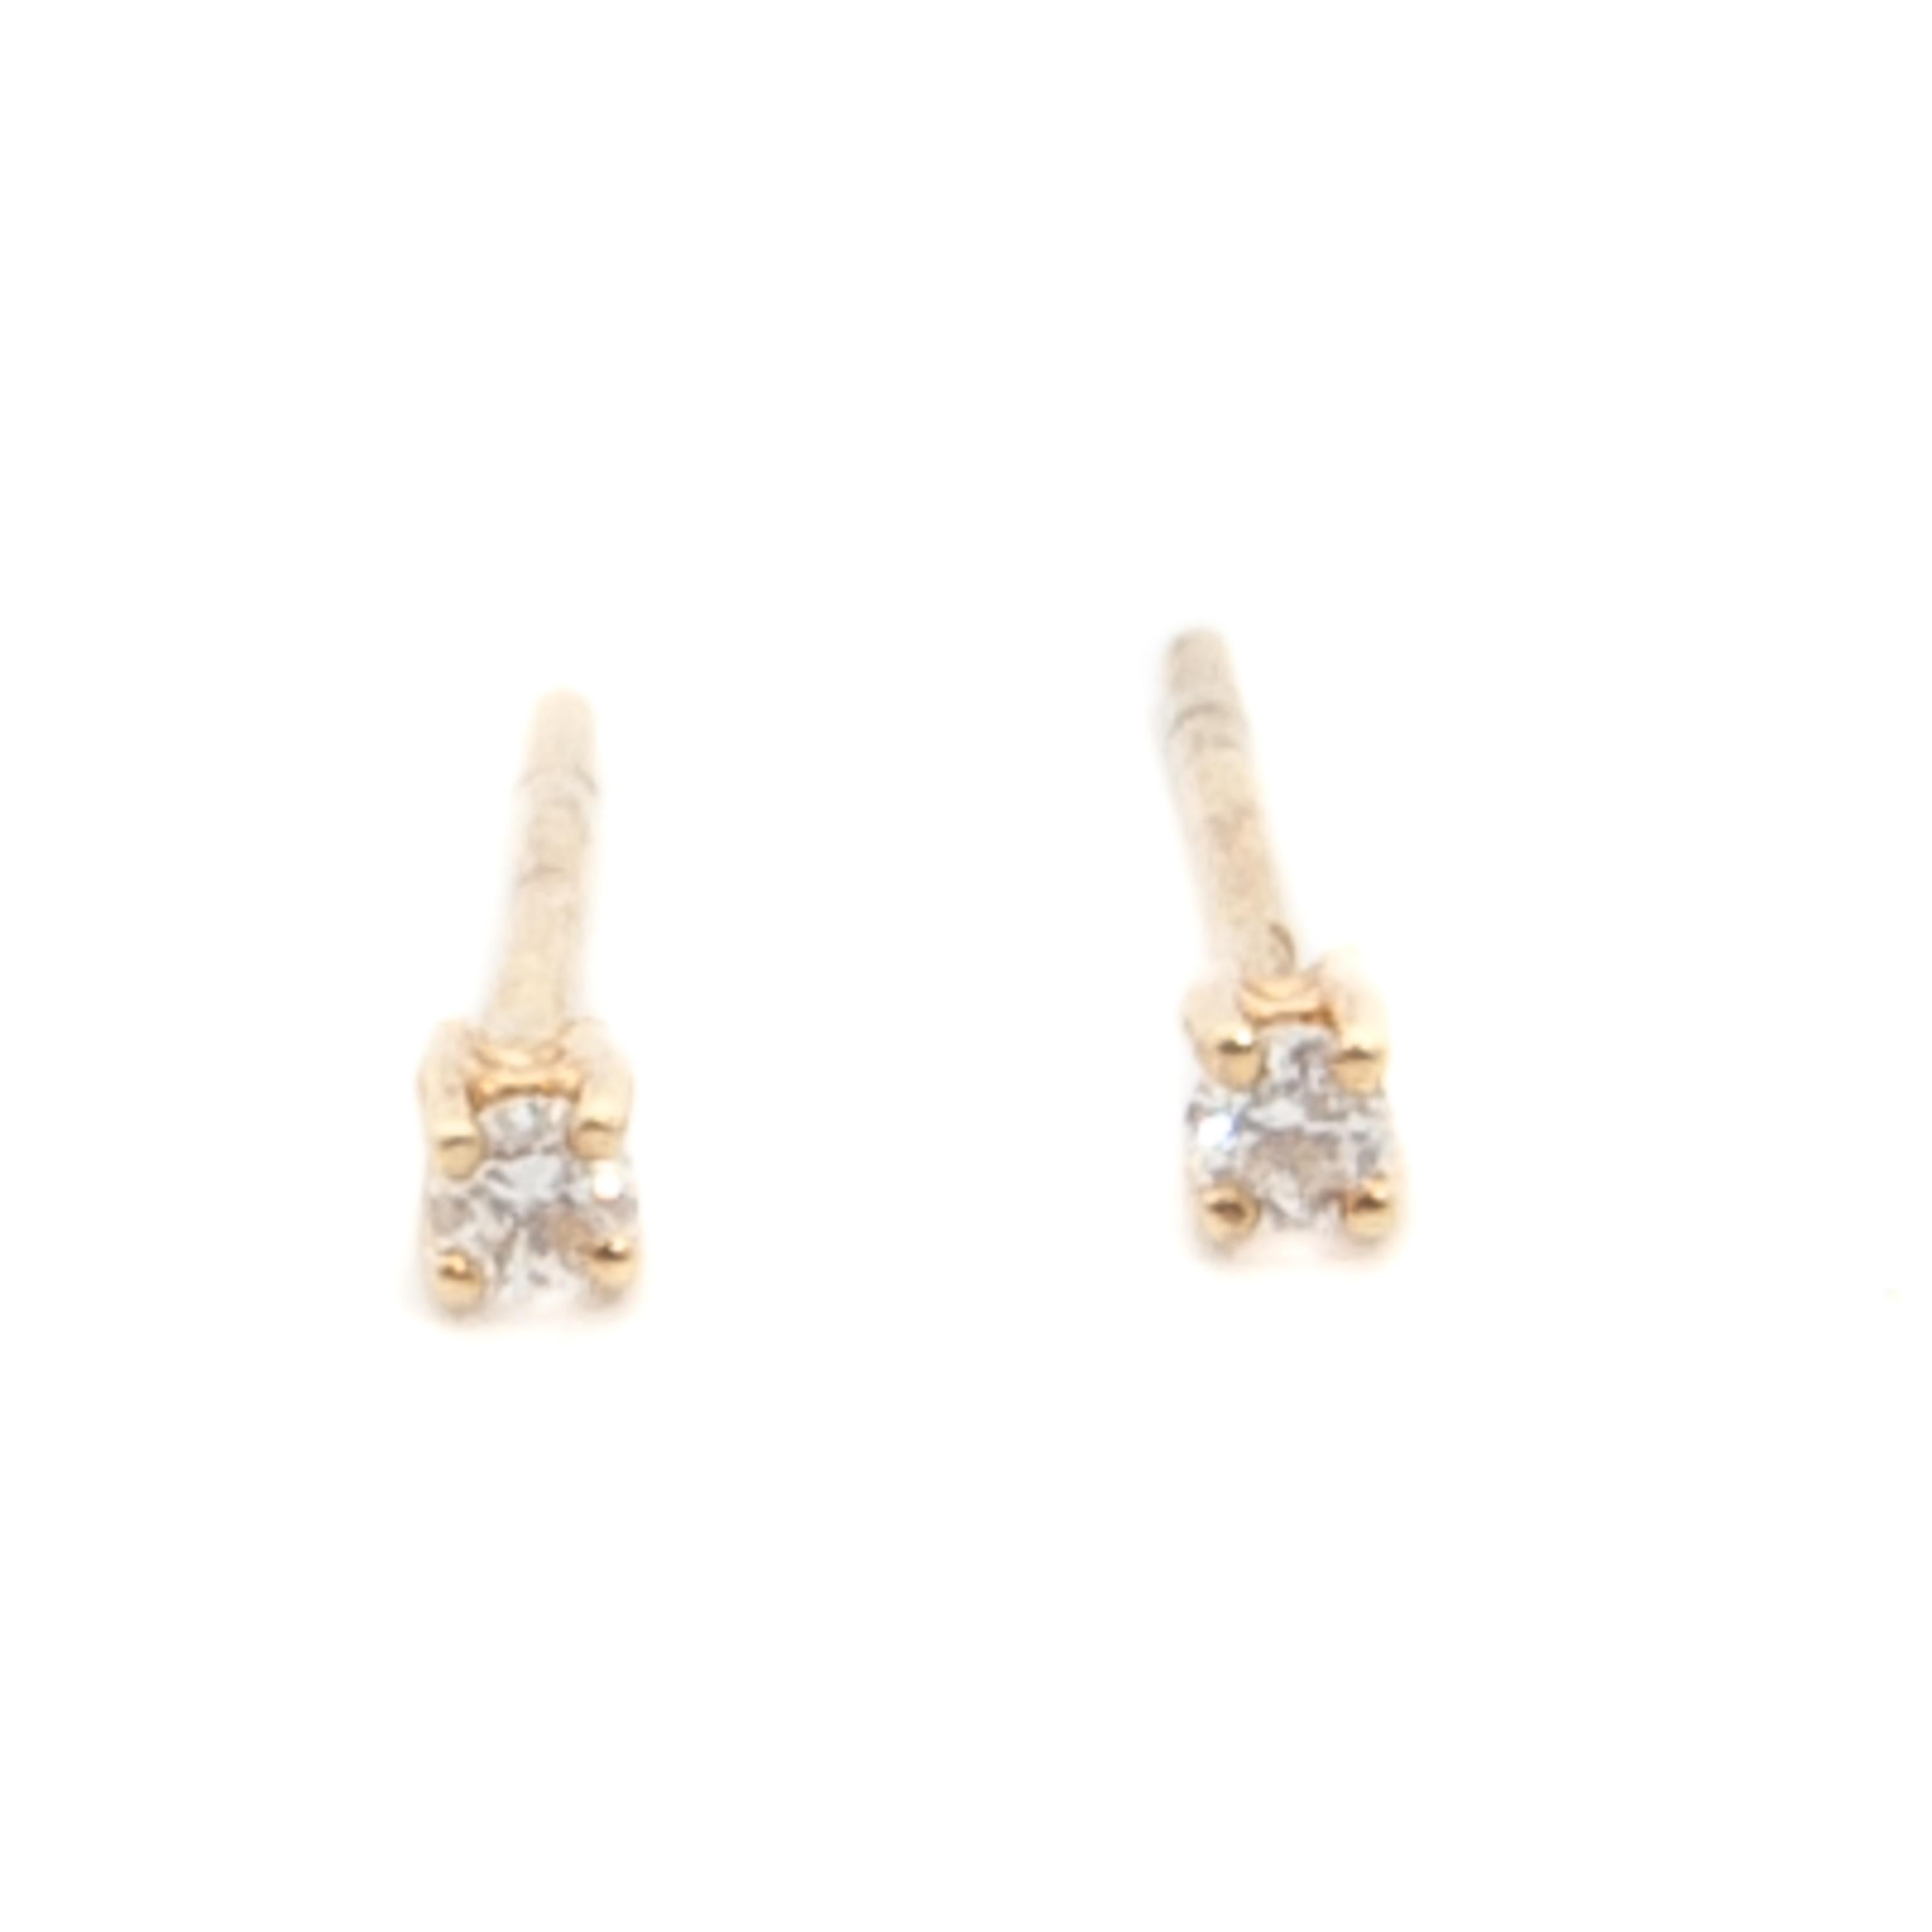 These beautiful solitaire stud earrings are made of 14 karat yellow gold. Each earring is set with a brilliant cut diamond, the diamonds are approximately 0.10 carat in total. The diamonds are prong set in a 14 karat gold frame. The earrings are set